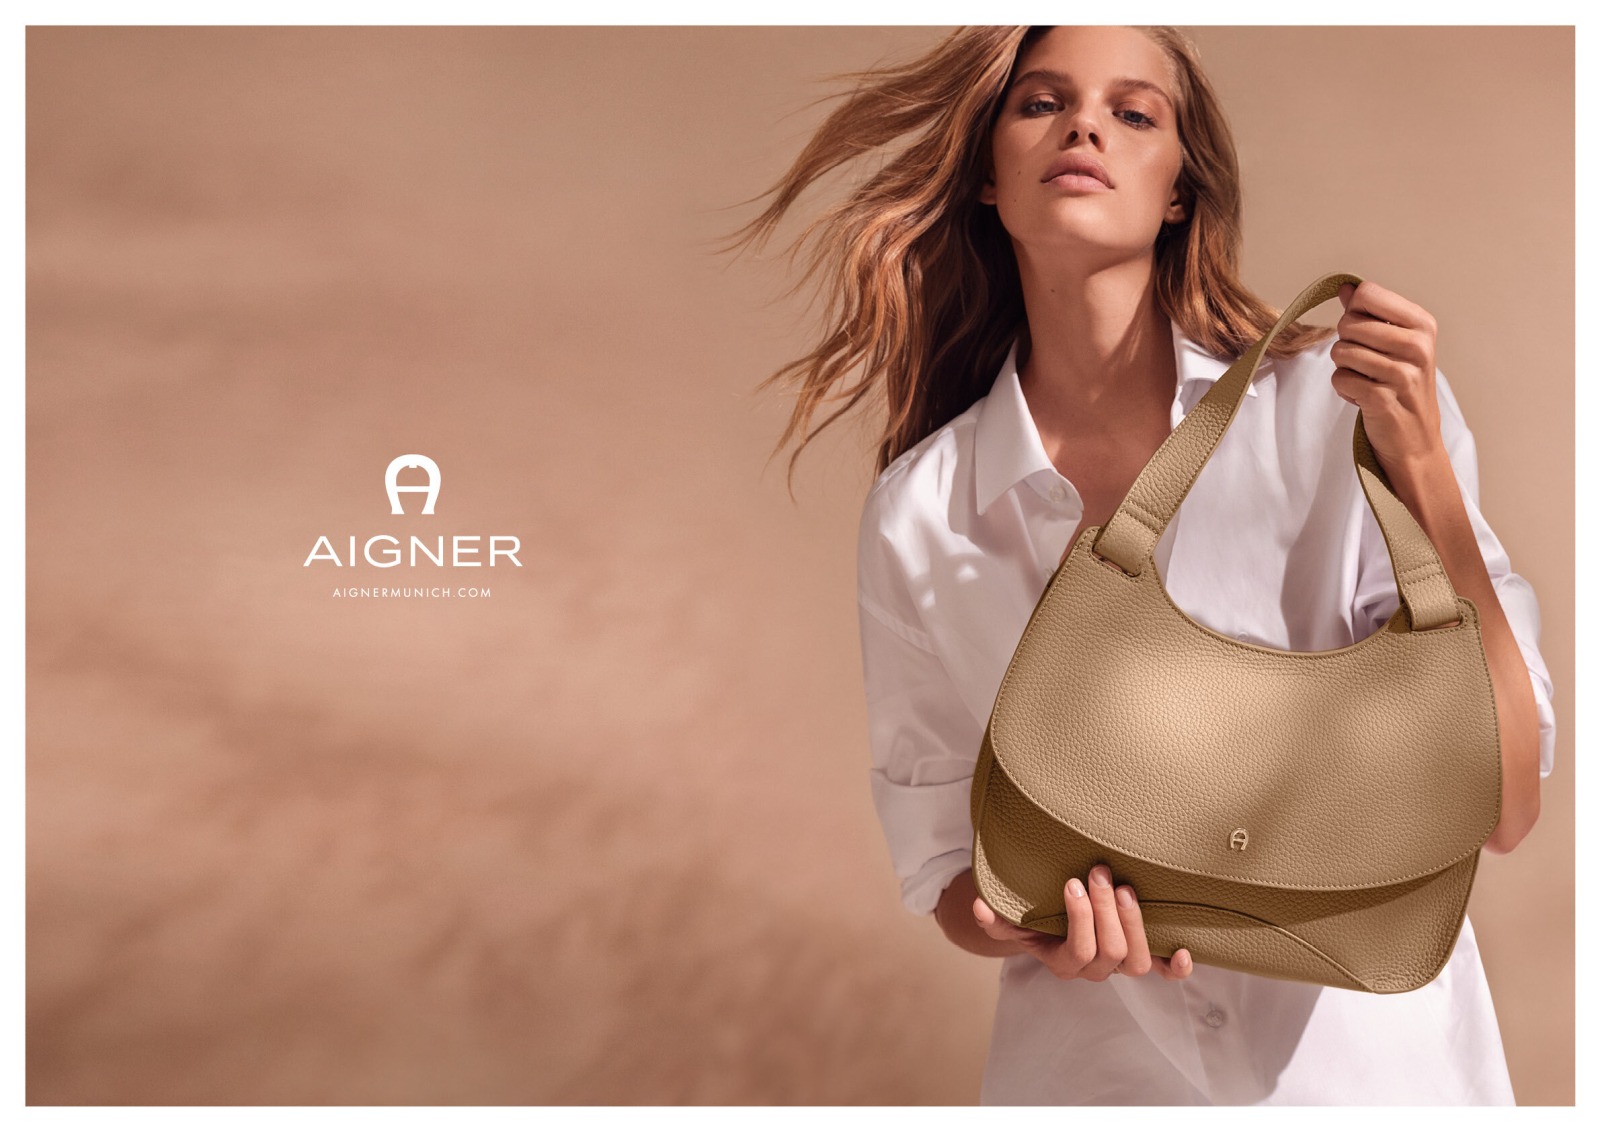 AIGNER 2 by Andreas ORTNER